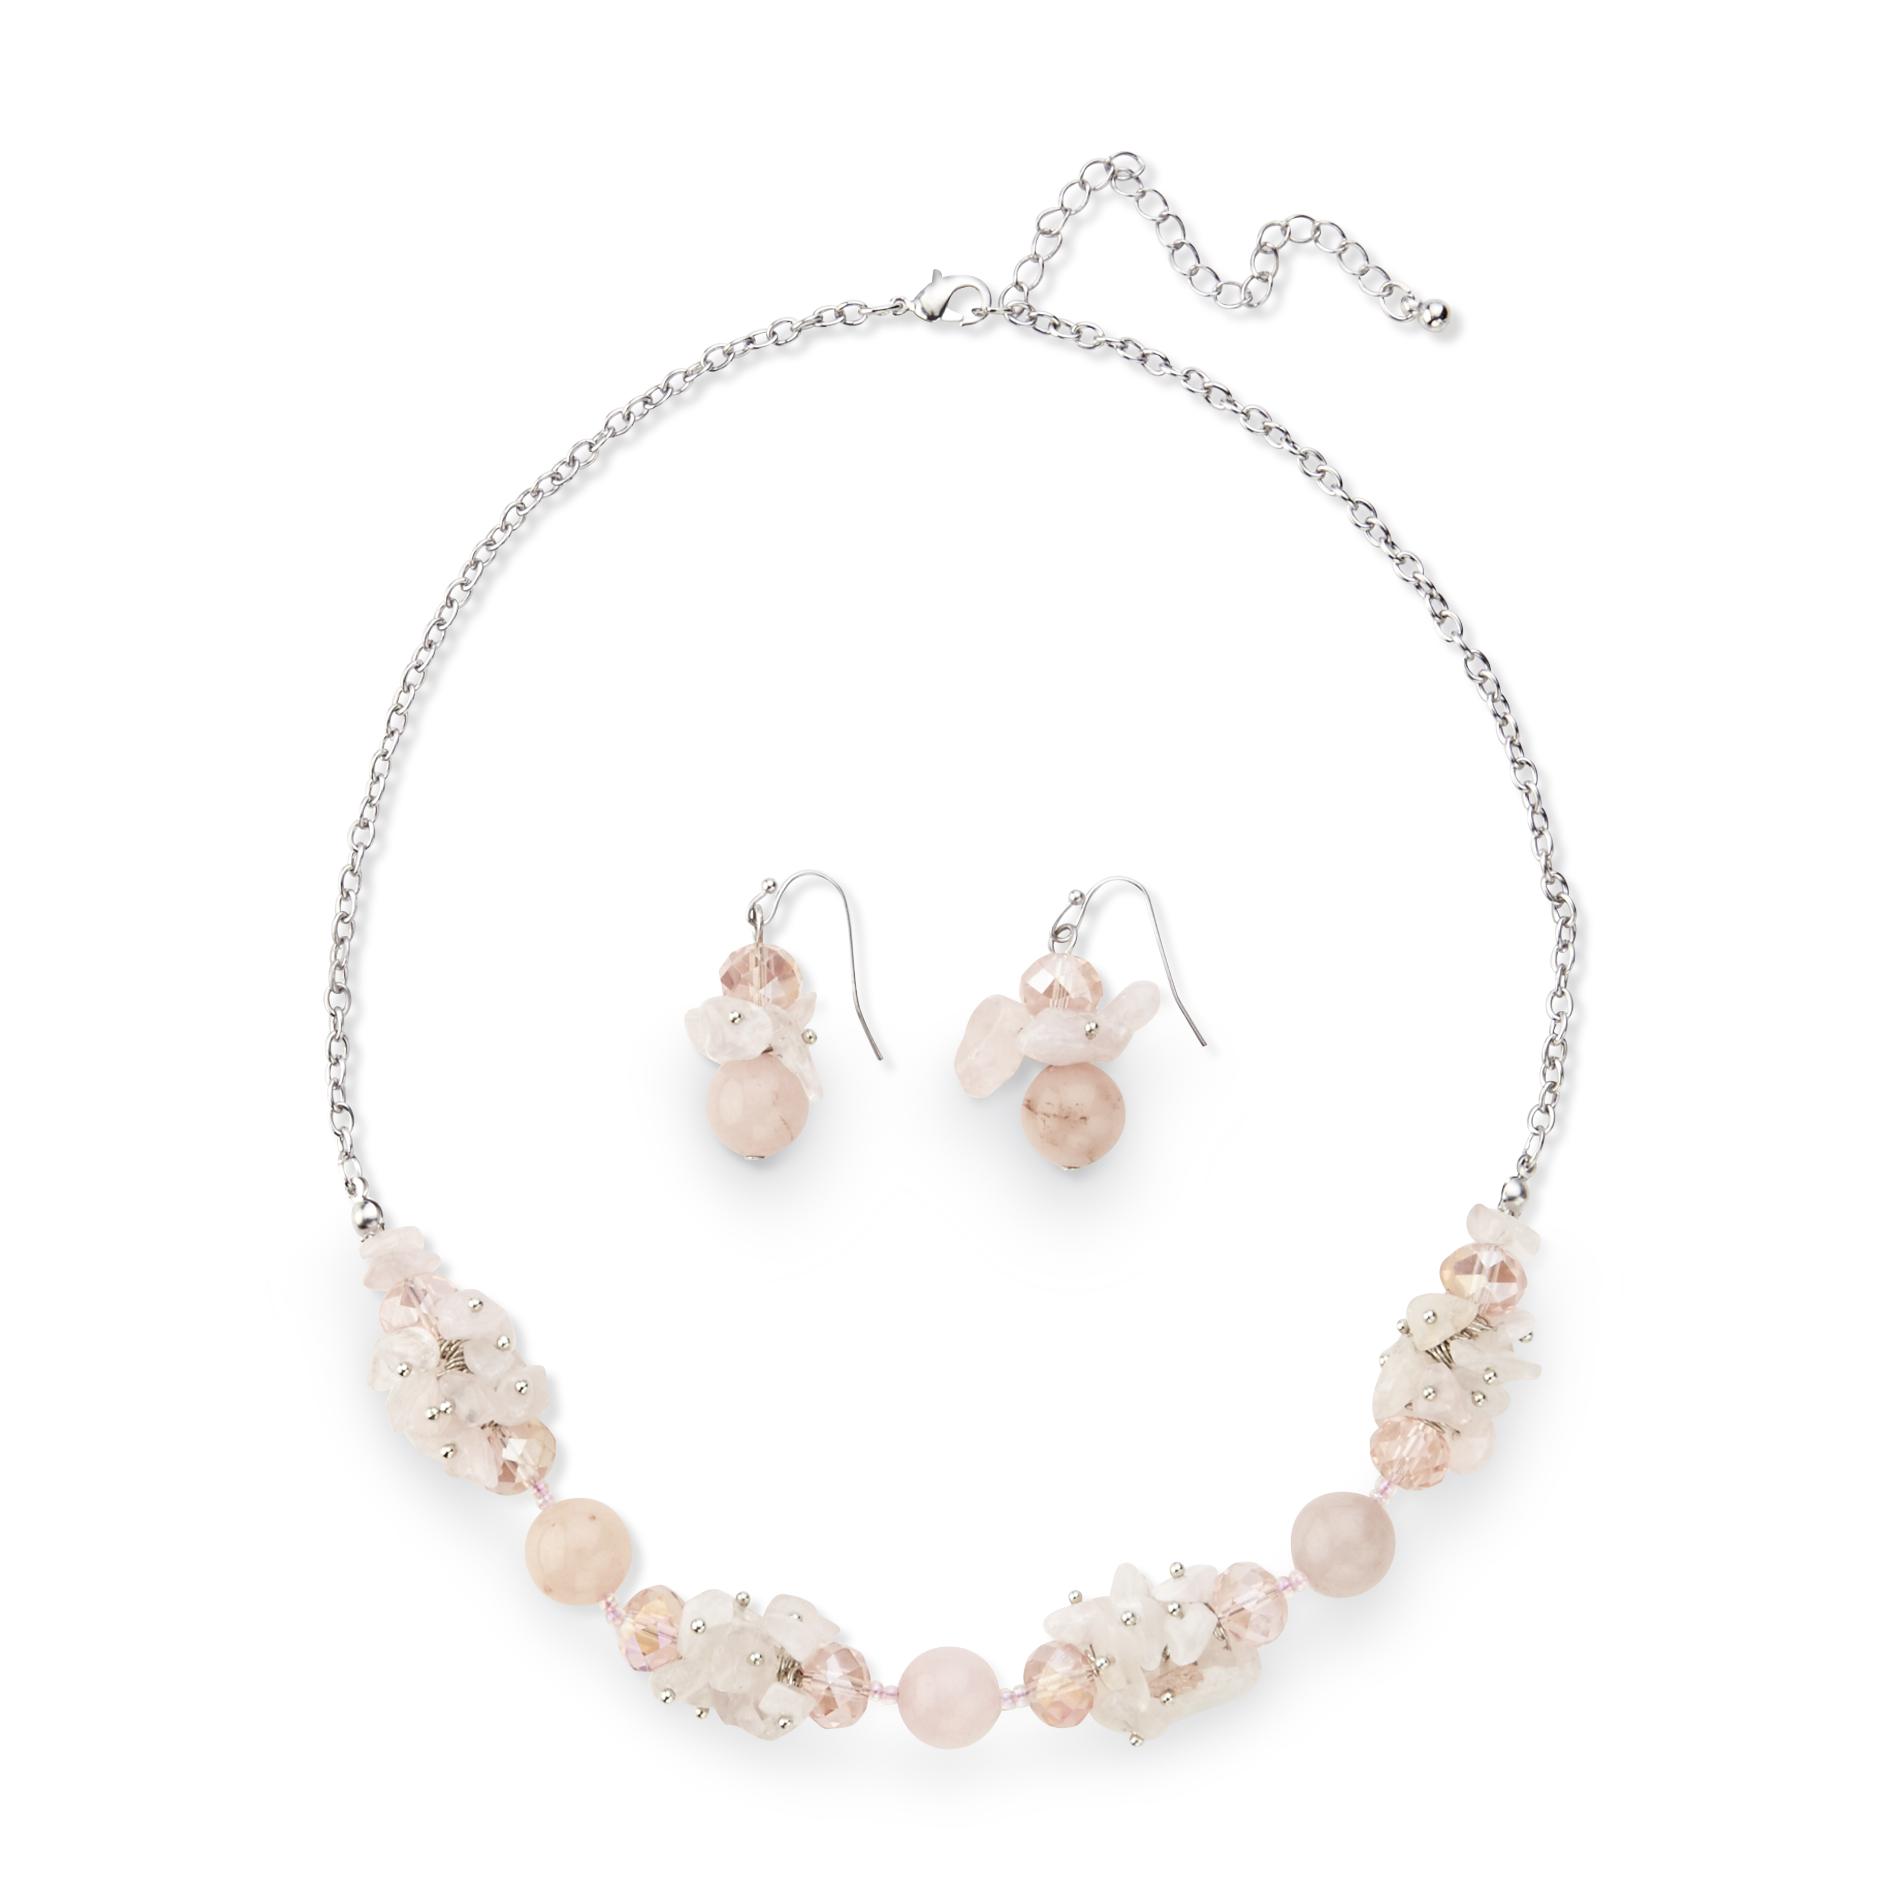 Jaclyn Smith Women's Cluster Necklace & Earrings - Mother's Day